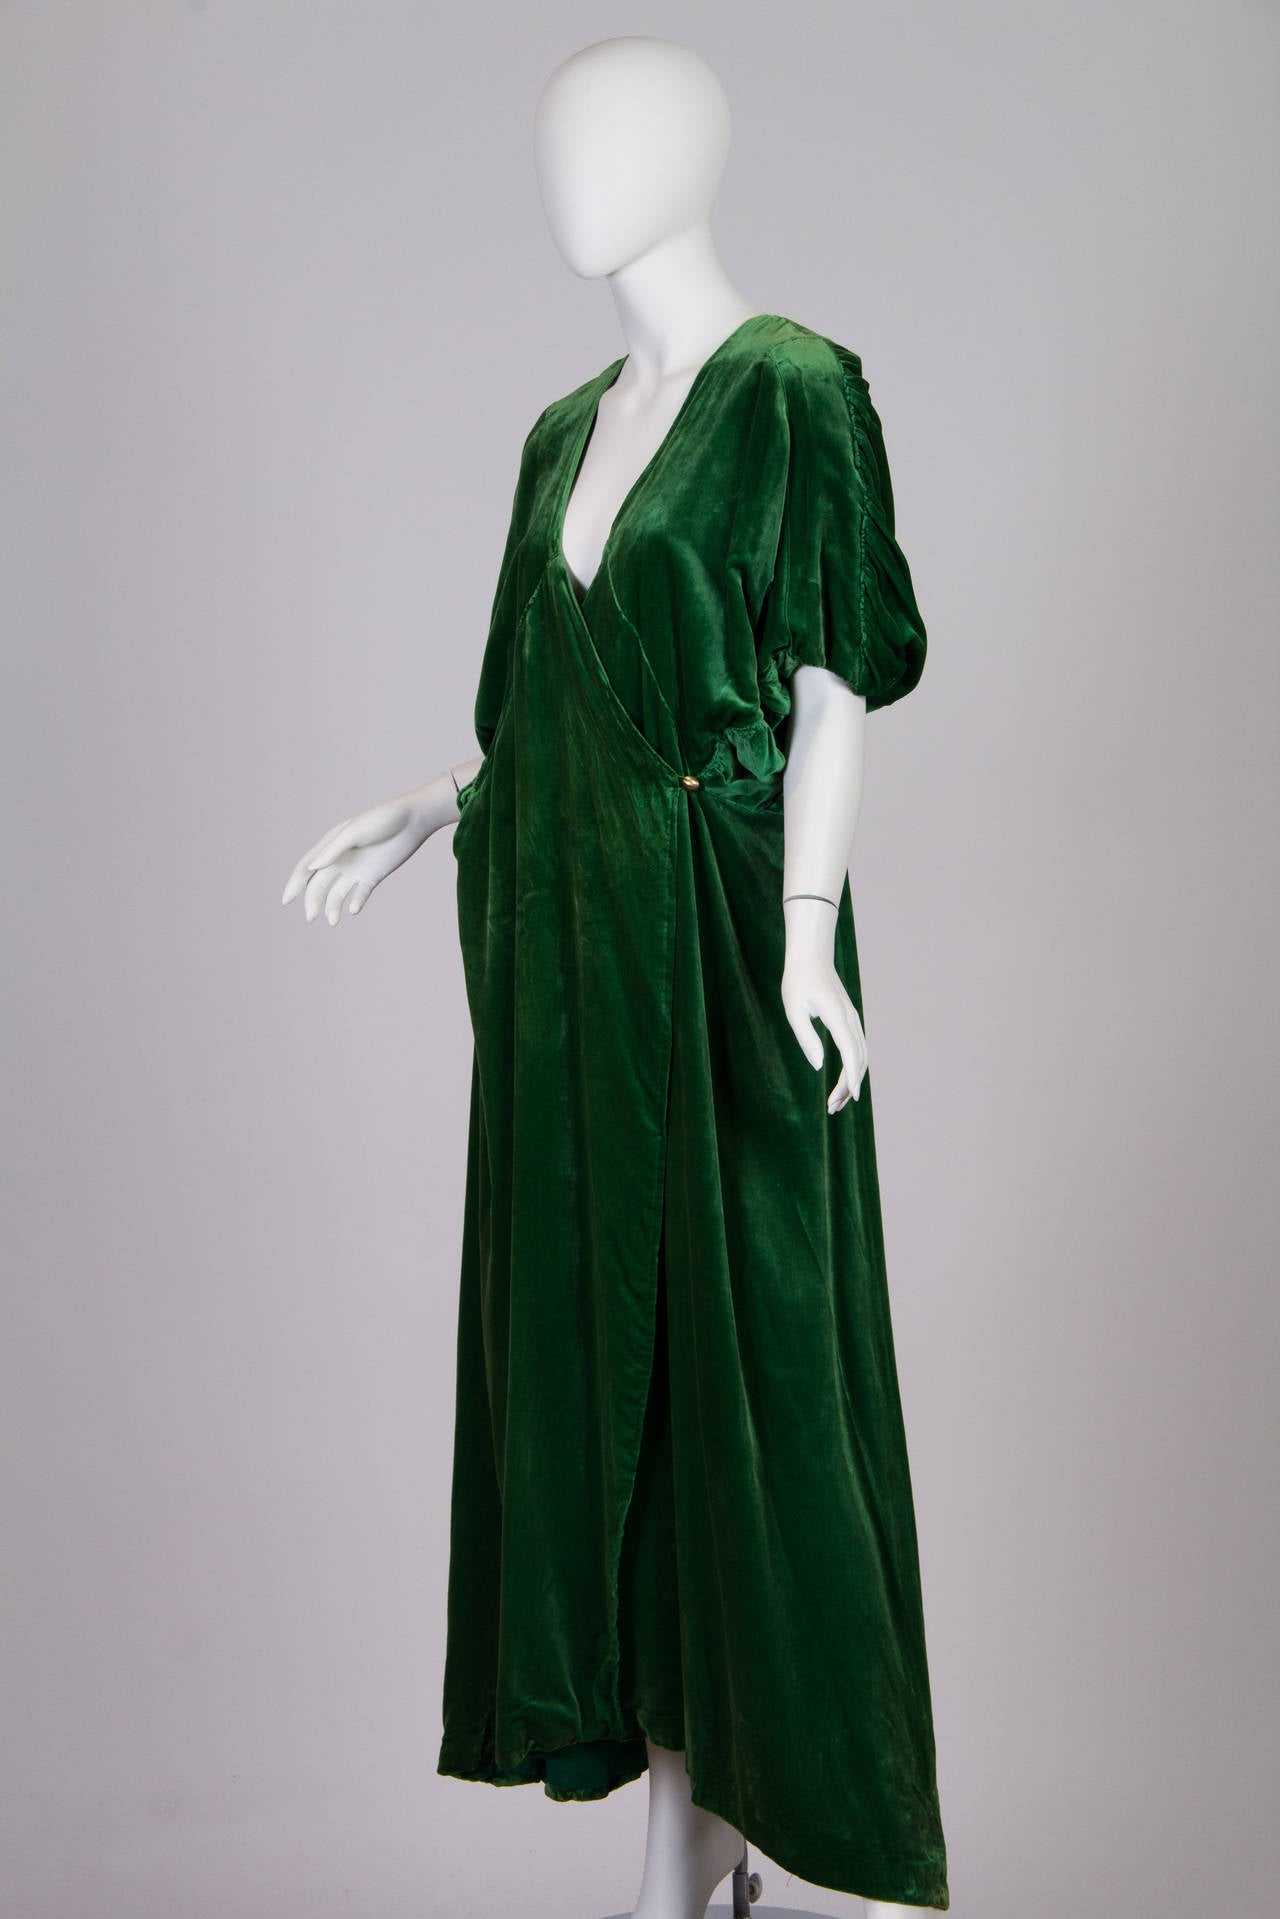 This ankle-length peignoir is the height of luxury loungewear from the opulent Edwardian era. Most likely dating from around 1912, this is the sort of robe which a lady might have pulled about herself while reading before bed in her suite on the